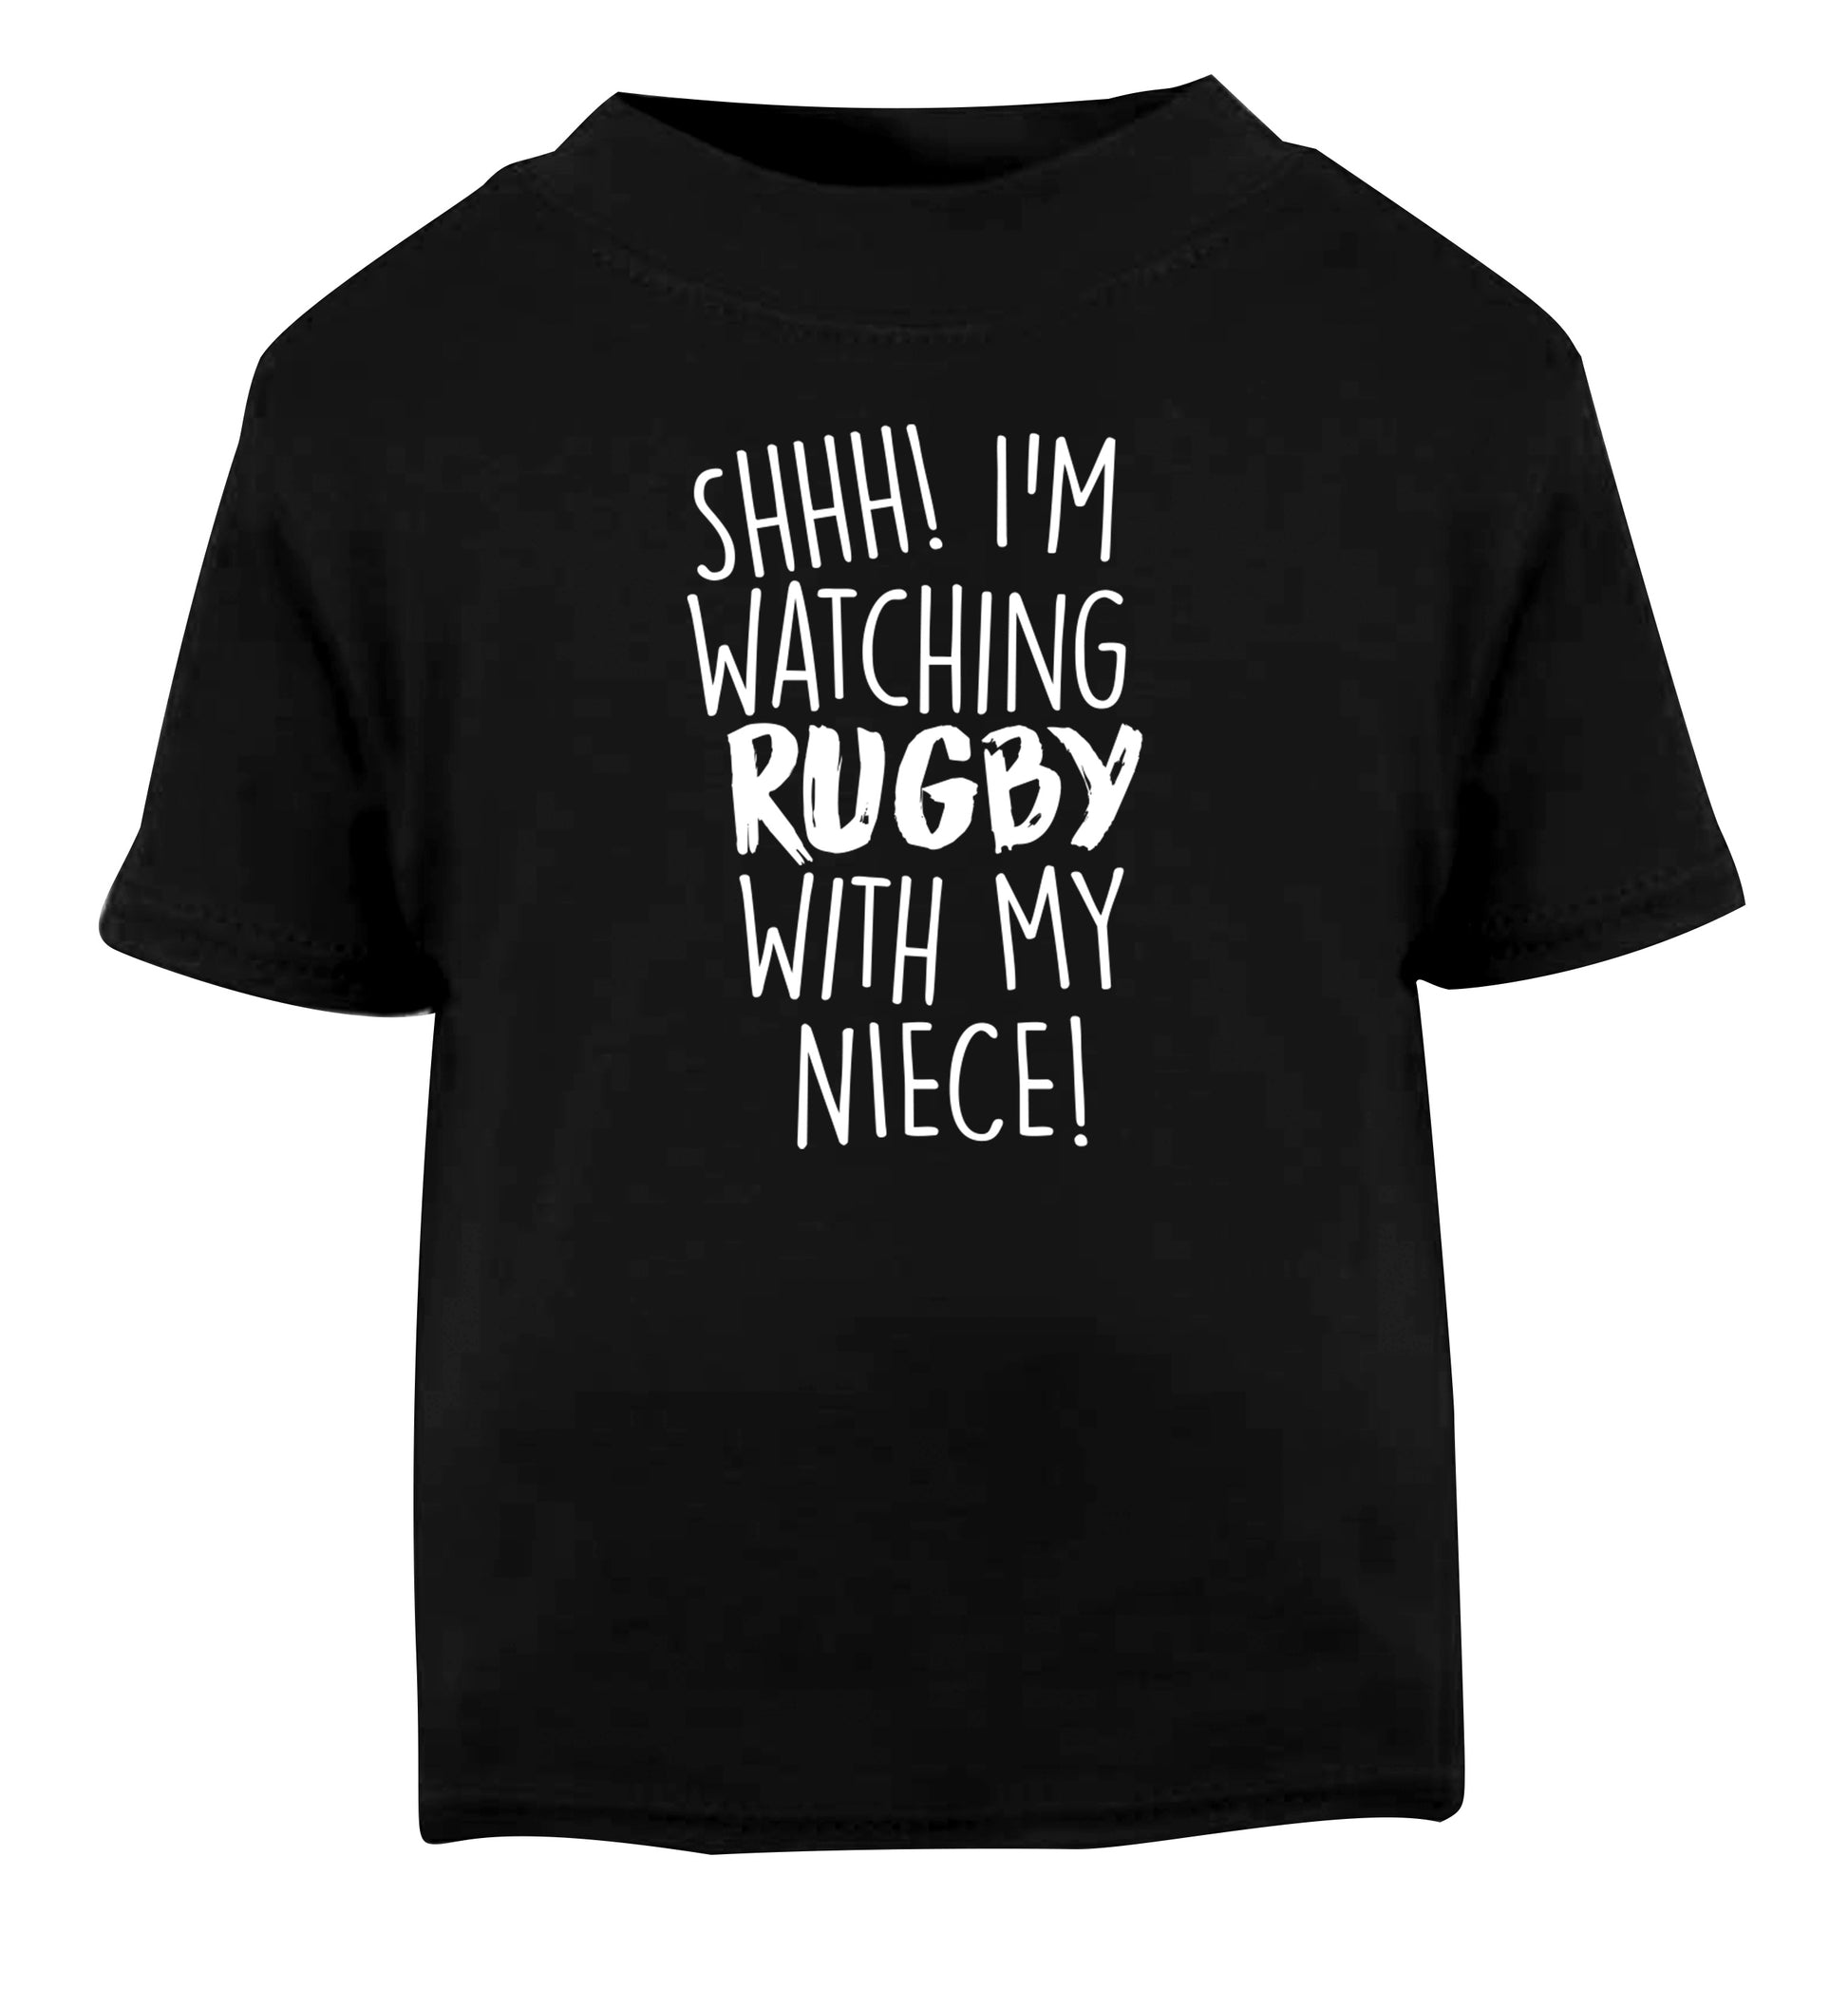 Shh.. I'm watching rugby with my niece Black Baby Toddler Tshirt 2 years